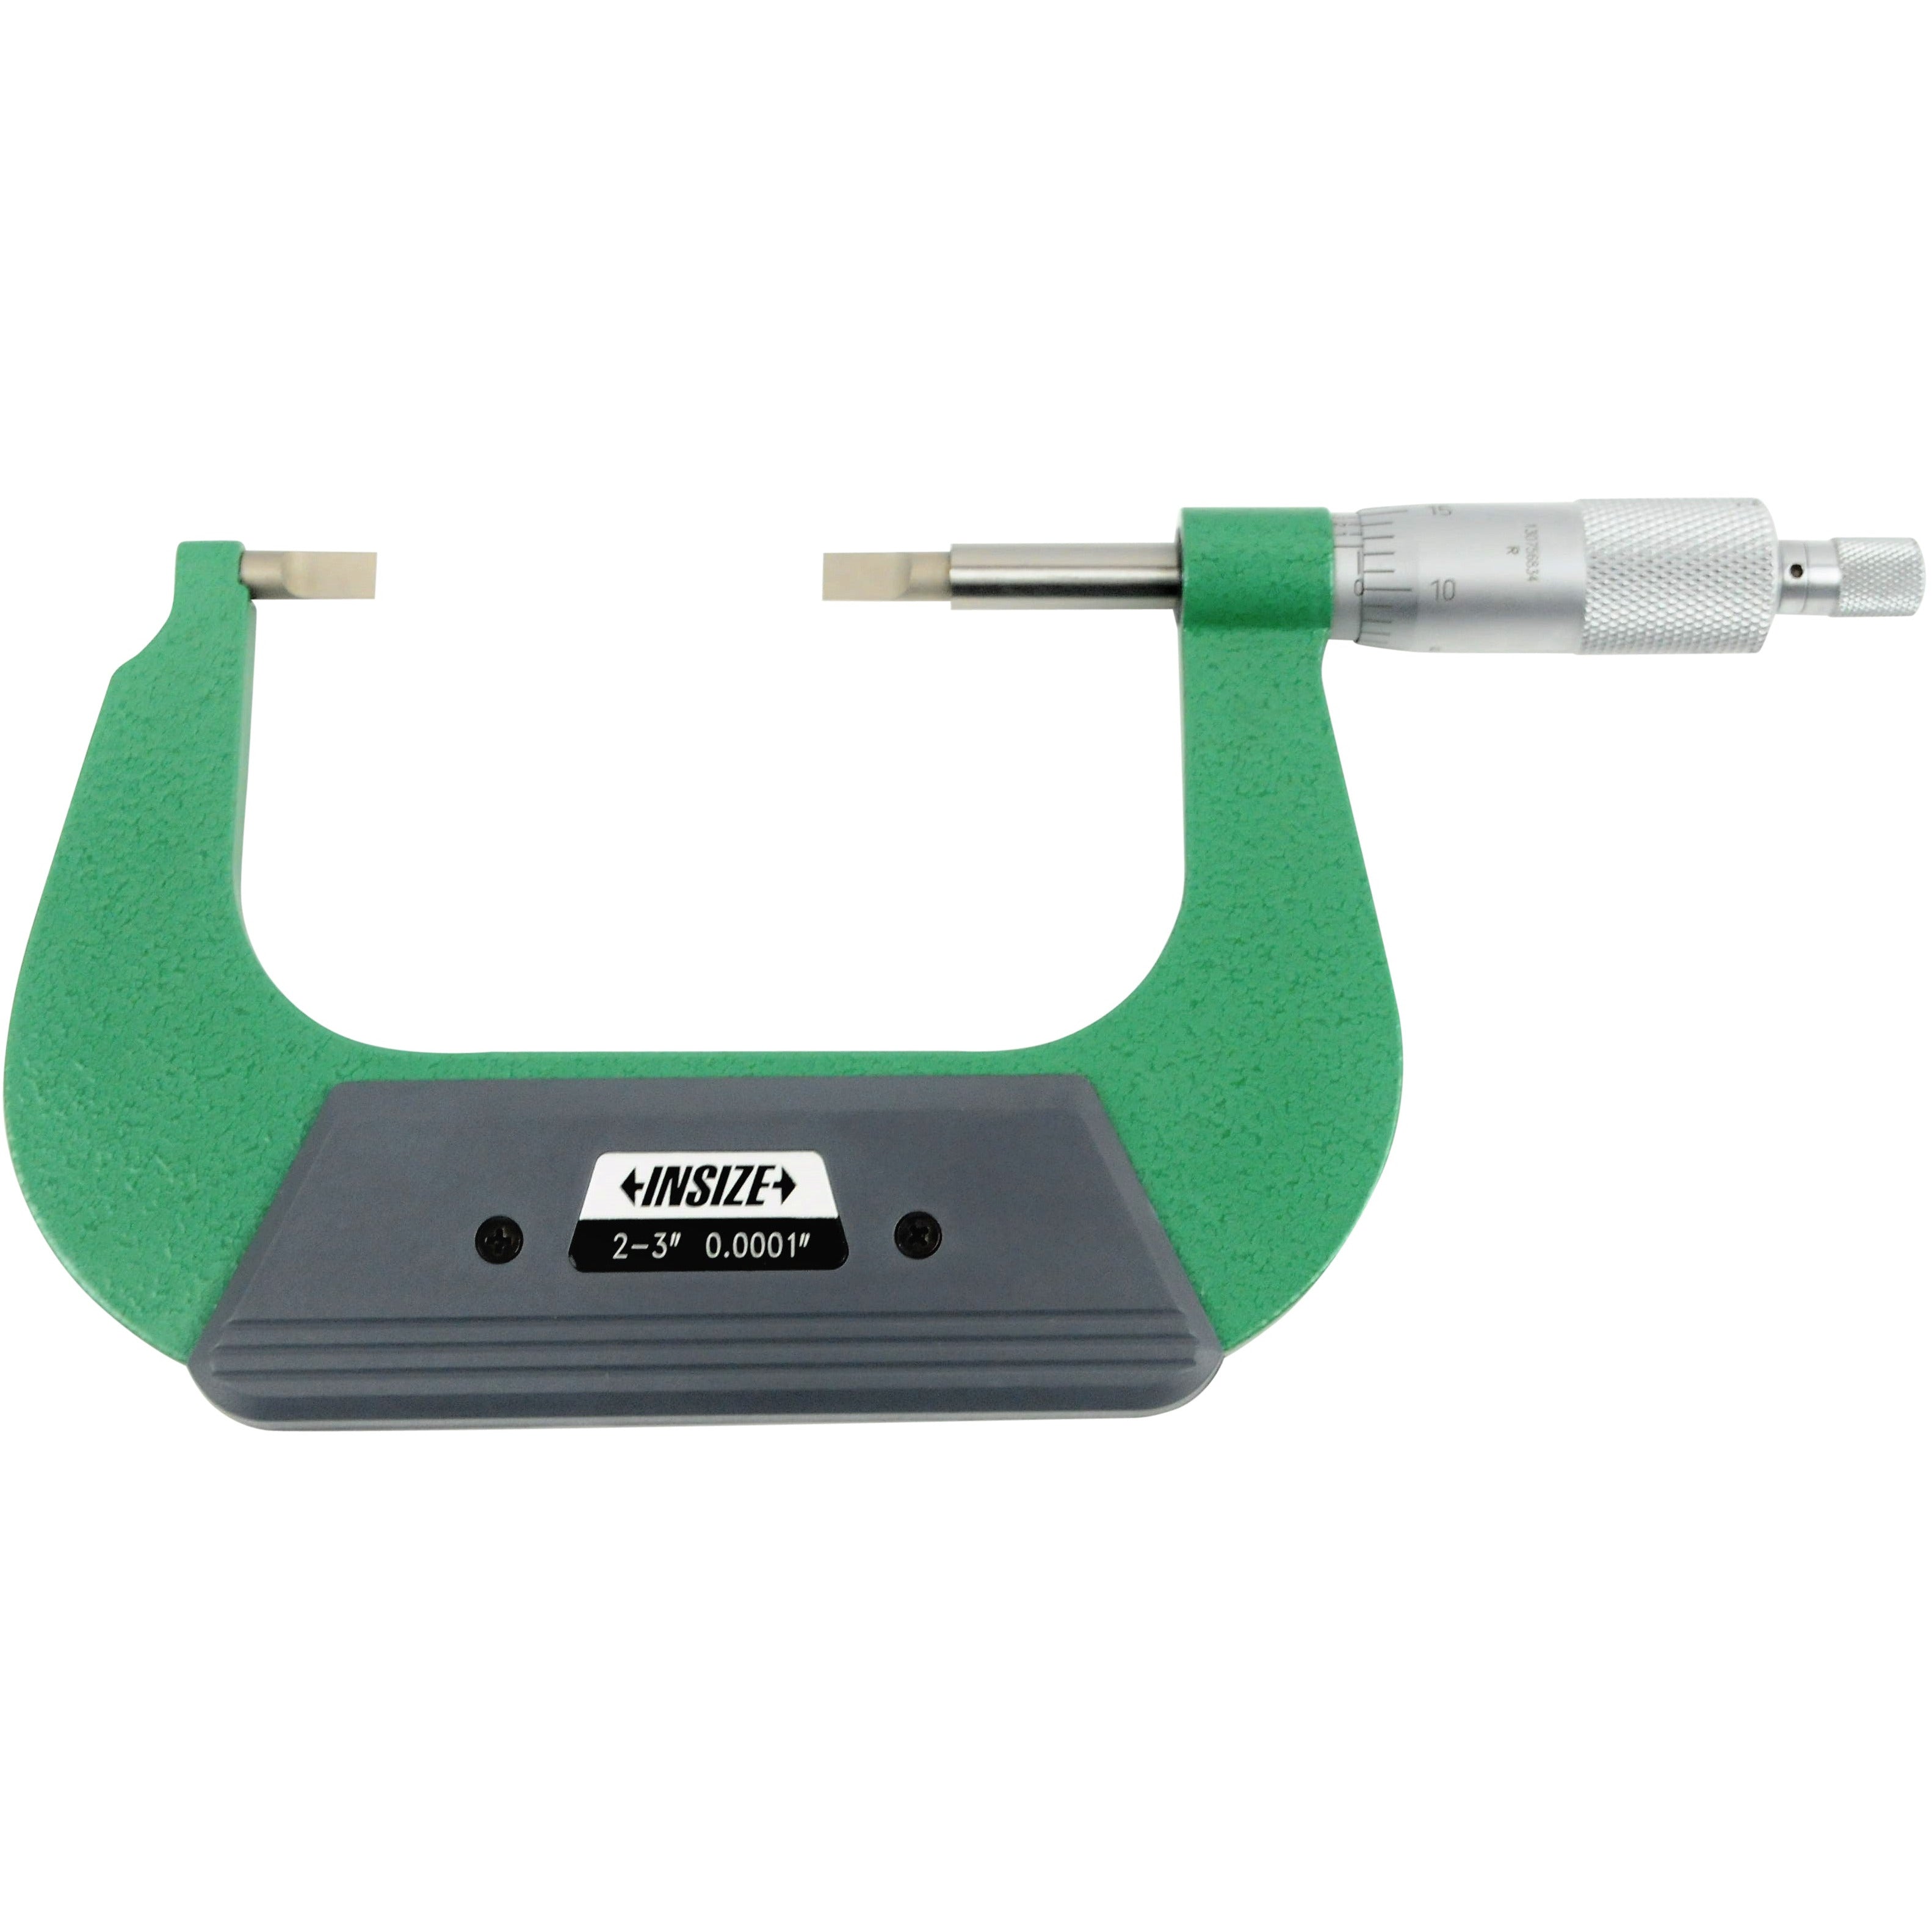 Insize Imperial Outside Blade Micrometer 2-3" Range Series 3232-3